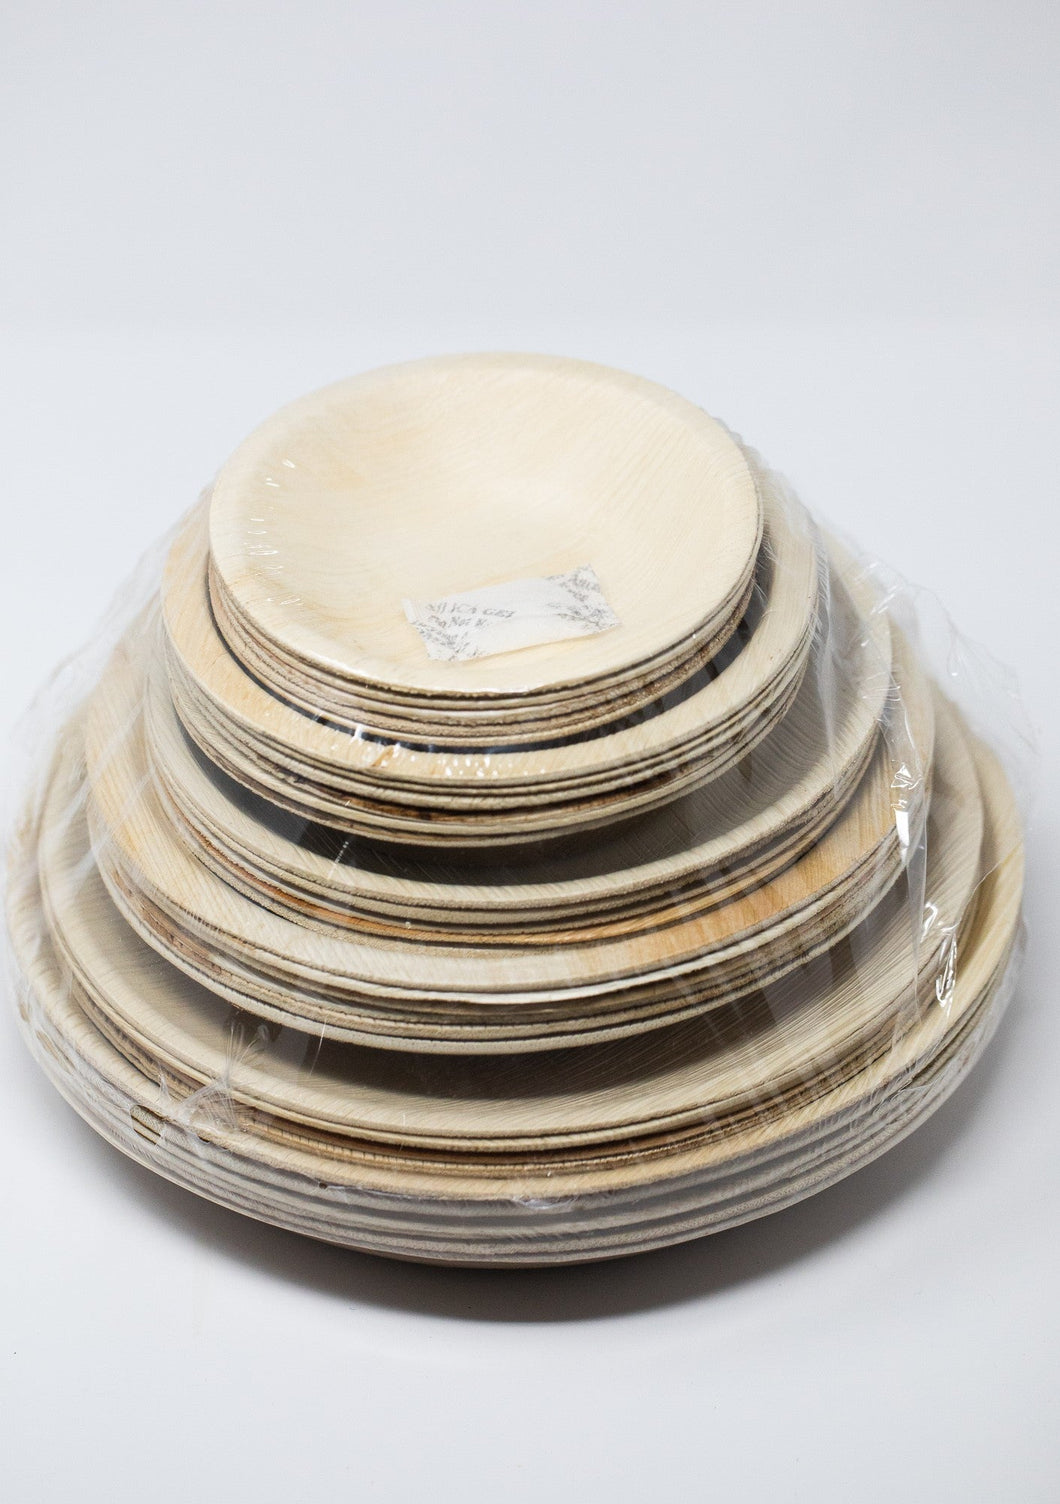 TheLotusGroup - Good For The Earth, Good For Us - 8-inch Round Palm Leaf Plate, 300 Count by TheLotusGroup - Good For The Earth, Good For Us - | Delivery near me in ... Farm2Me #url#